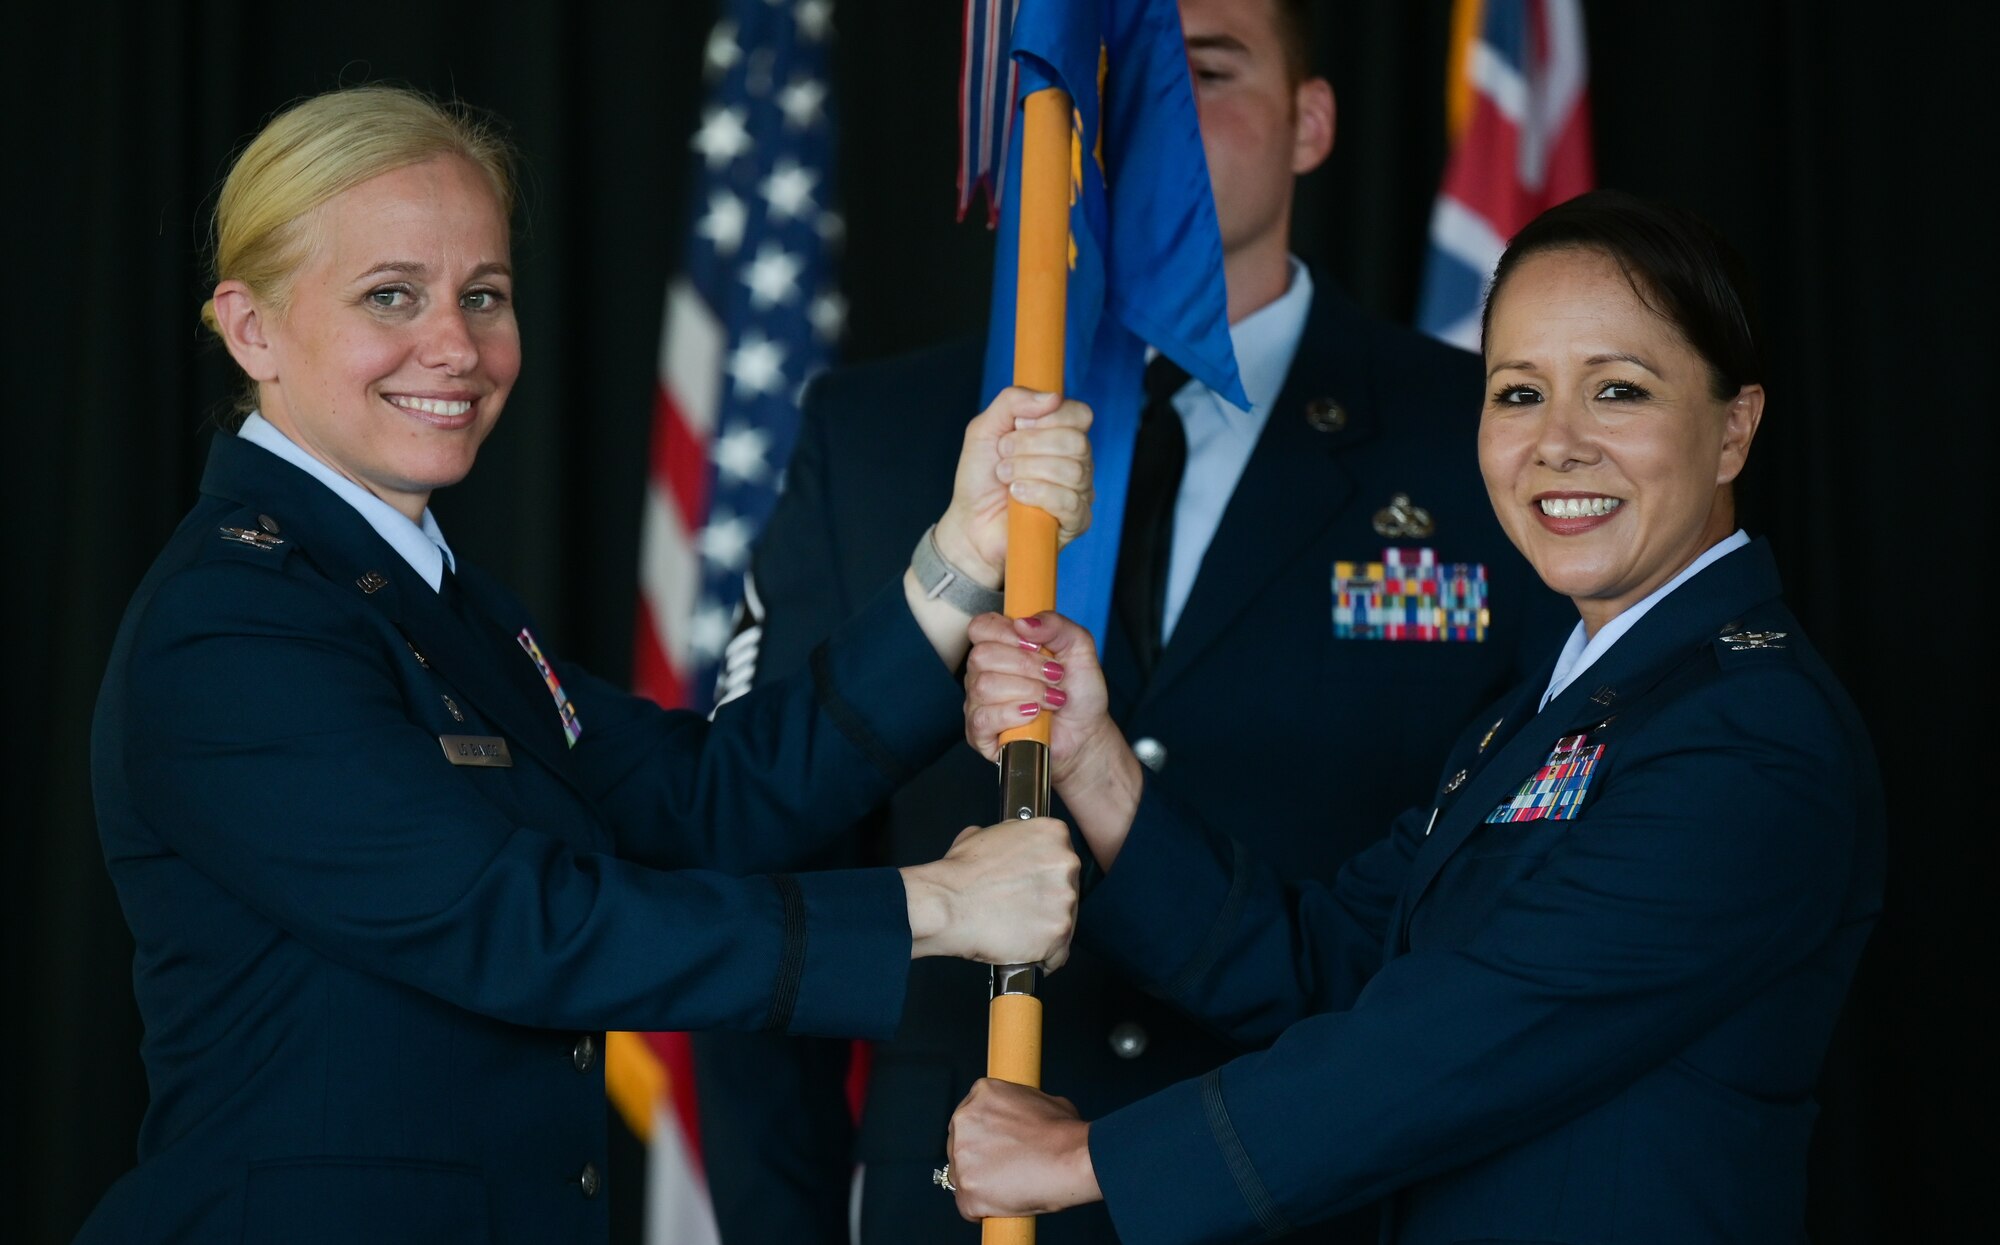 Col. Michele Lo Bianco, 15th Wing commander, hands the guidon to Col. Stella Garcia, 15th Medical Group incoming commander, during a change of command ceremony at Joint Base Pearl Harbor-Hickam, Hawaii, Aug. 1, 2022. During the ceremony, a guidon is passed from the former commander to the new commander, representing the transfer of responsibility. (U.S. Air Force photo by Staff Sgt. Alan Ricker)